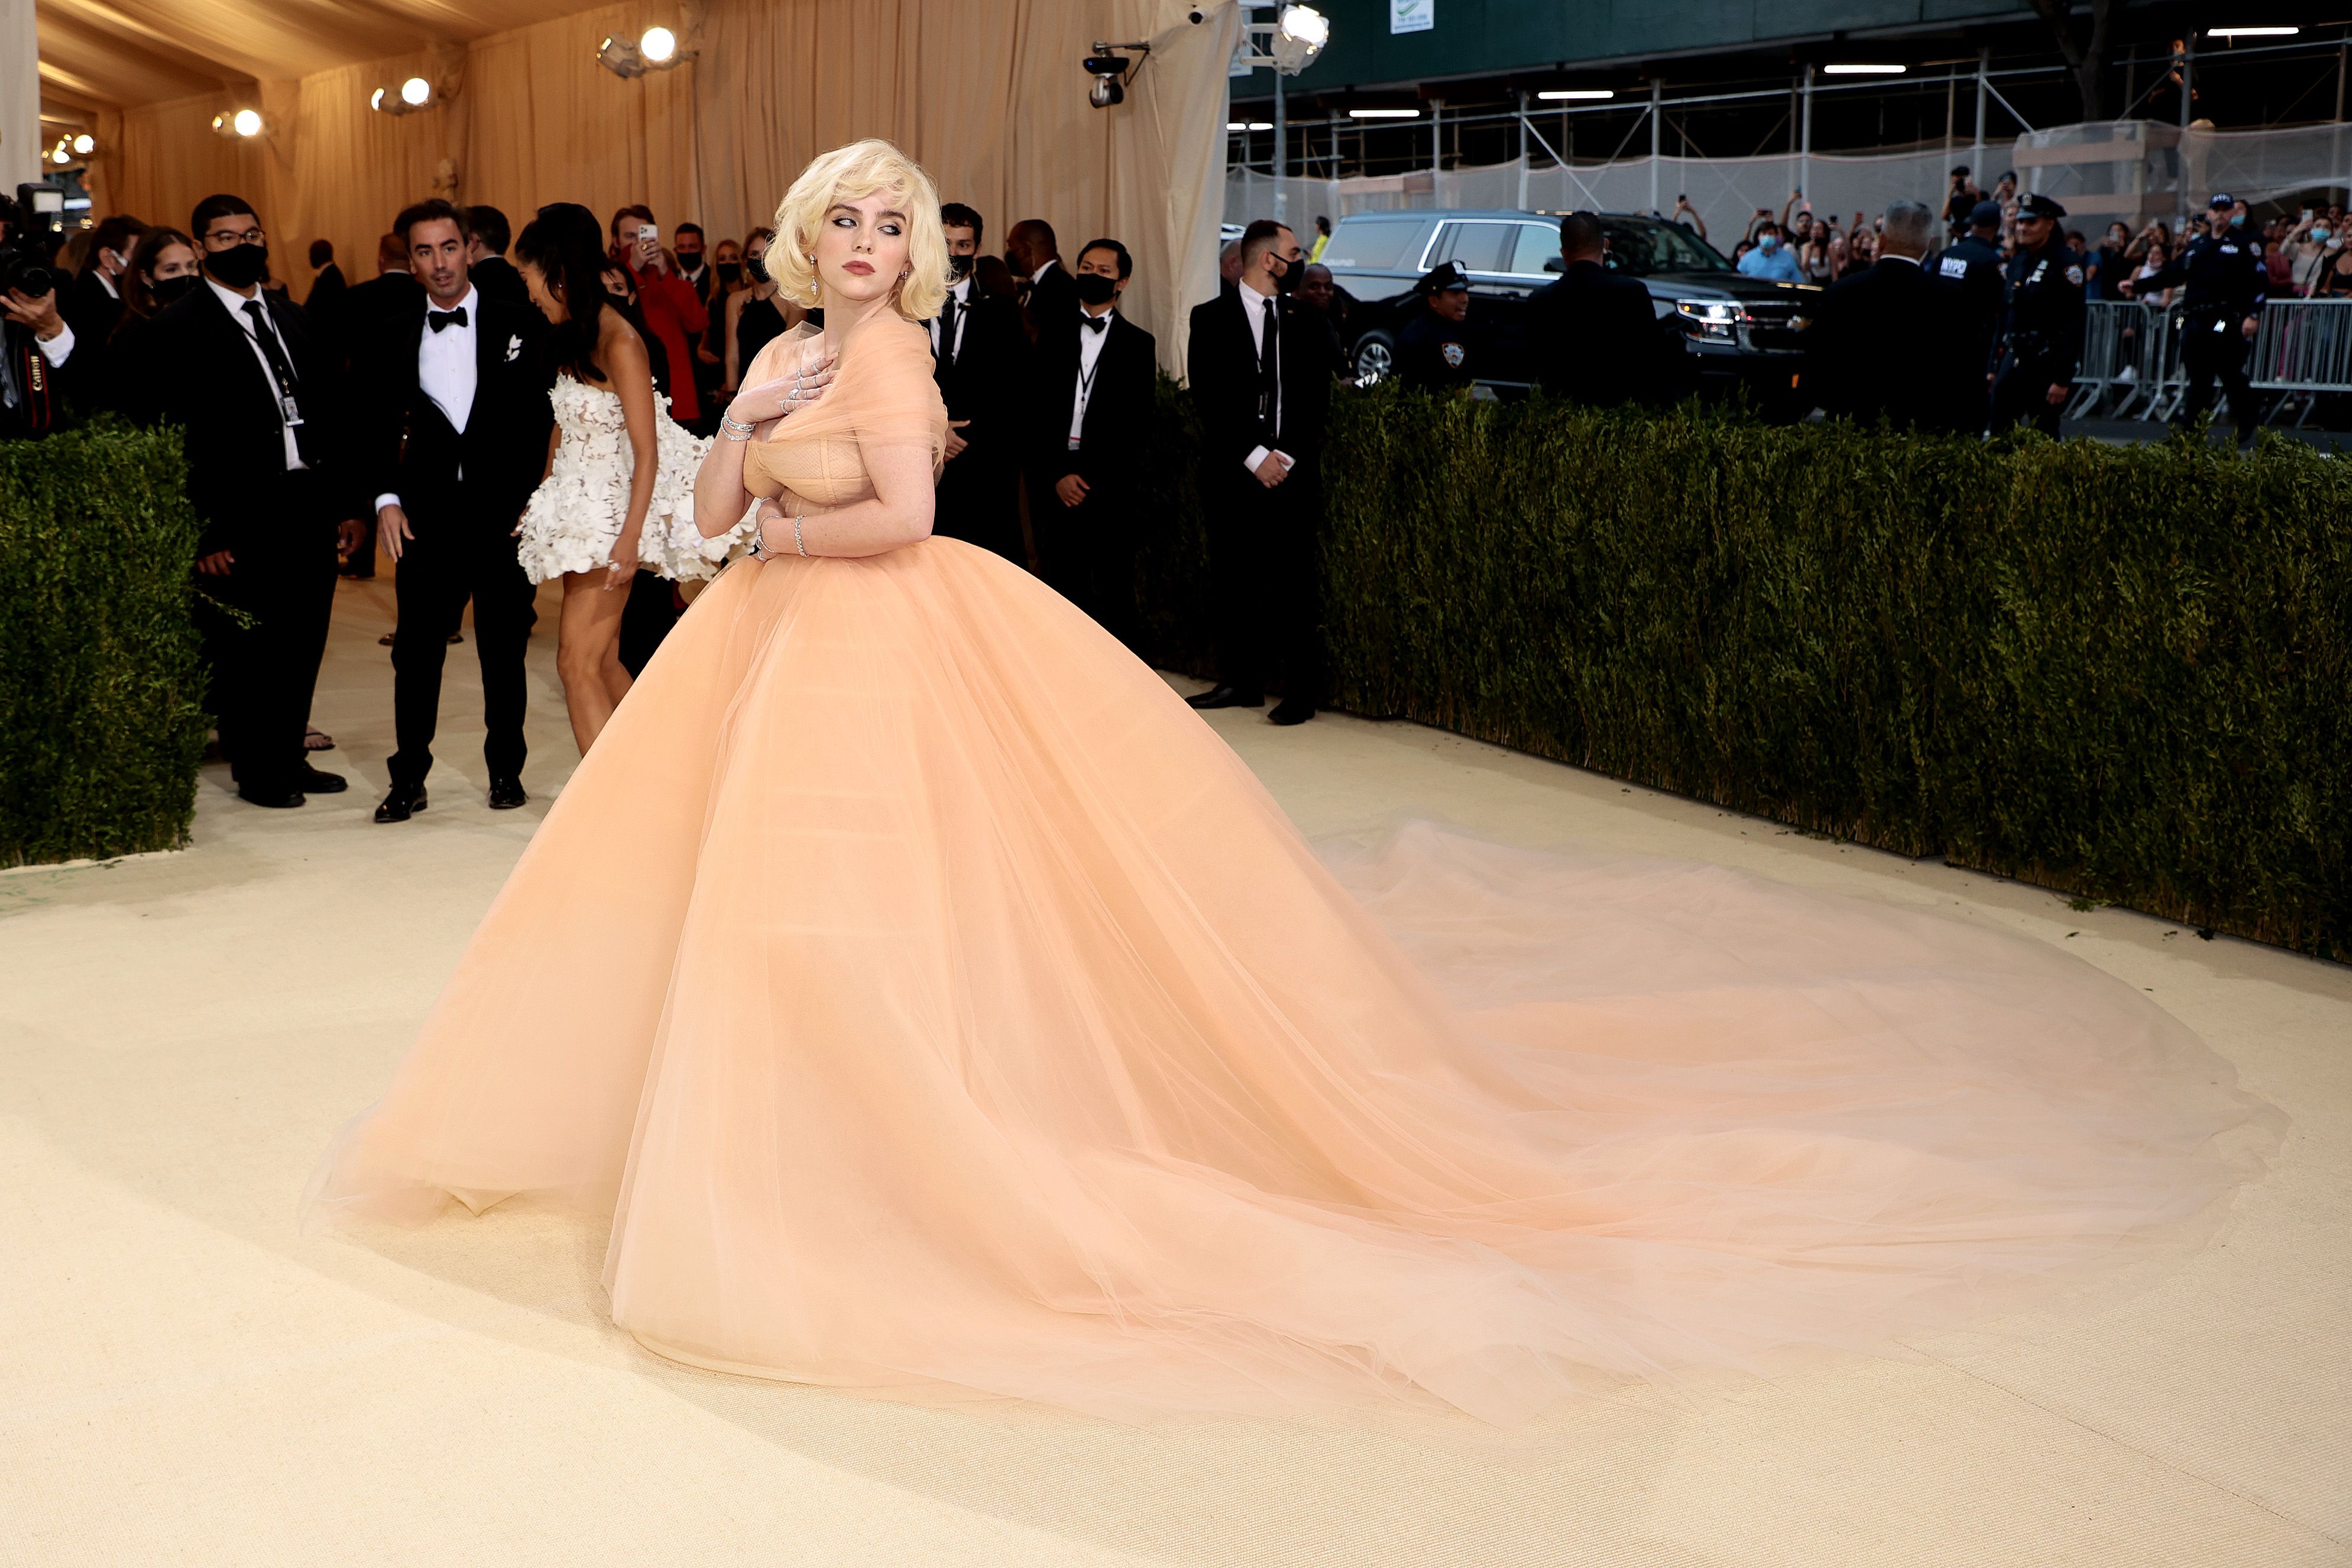 Inside The Met Gala: The Money Behind Fashion's Biggest Night